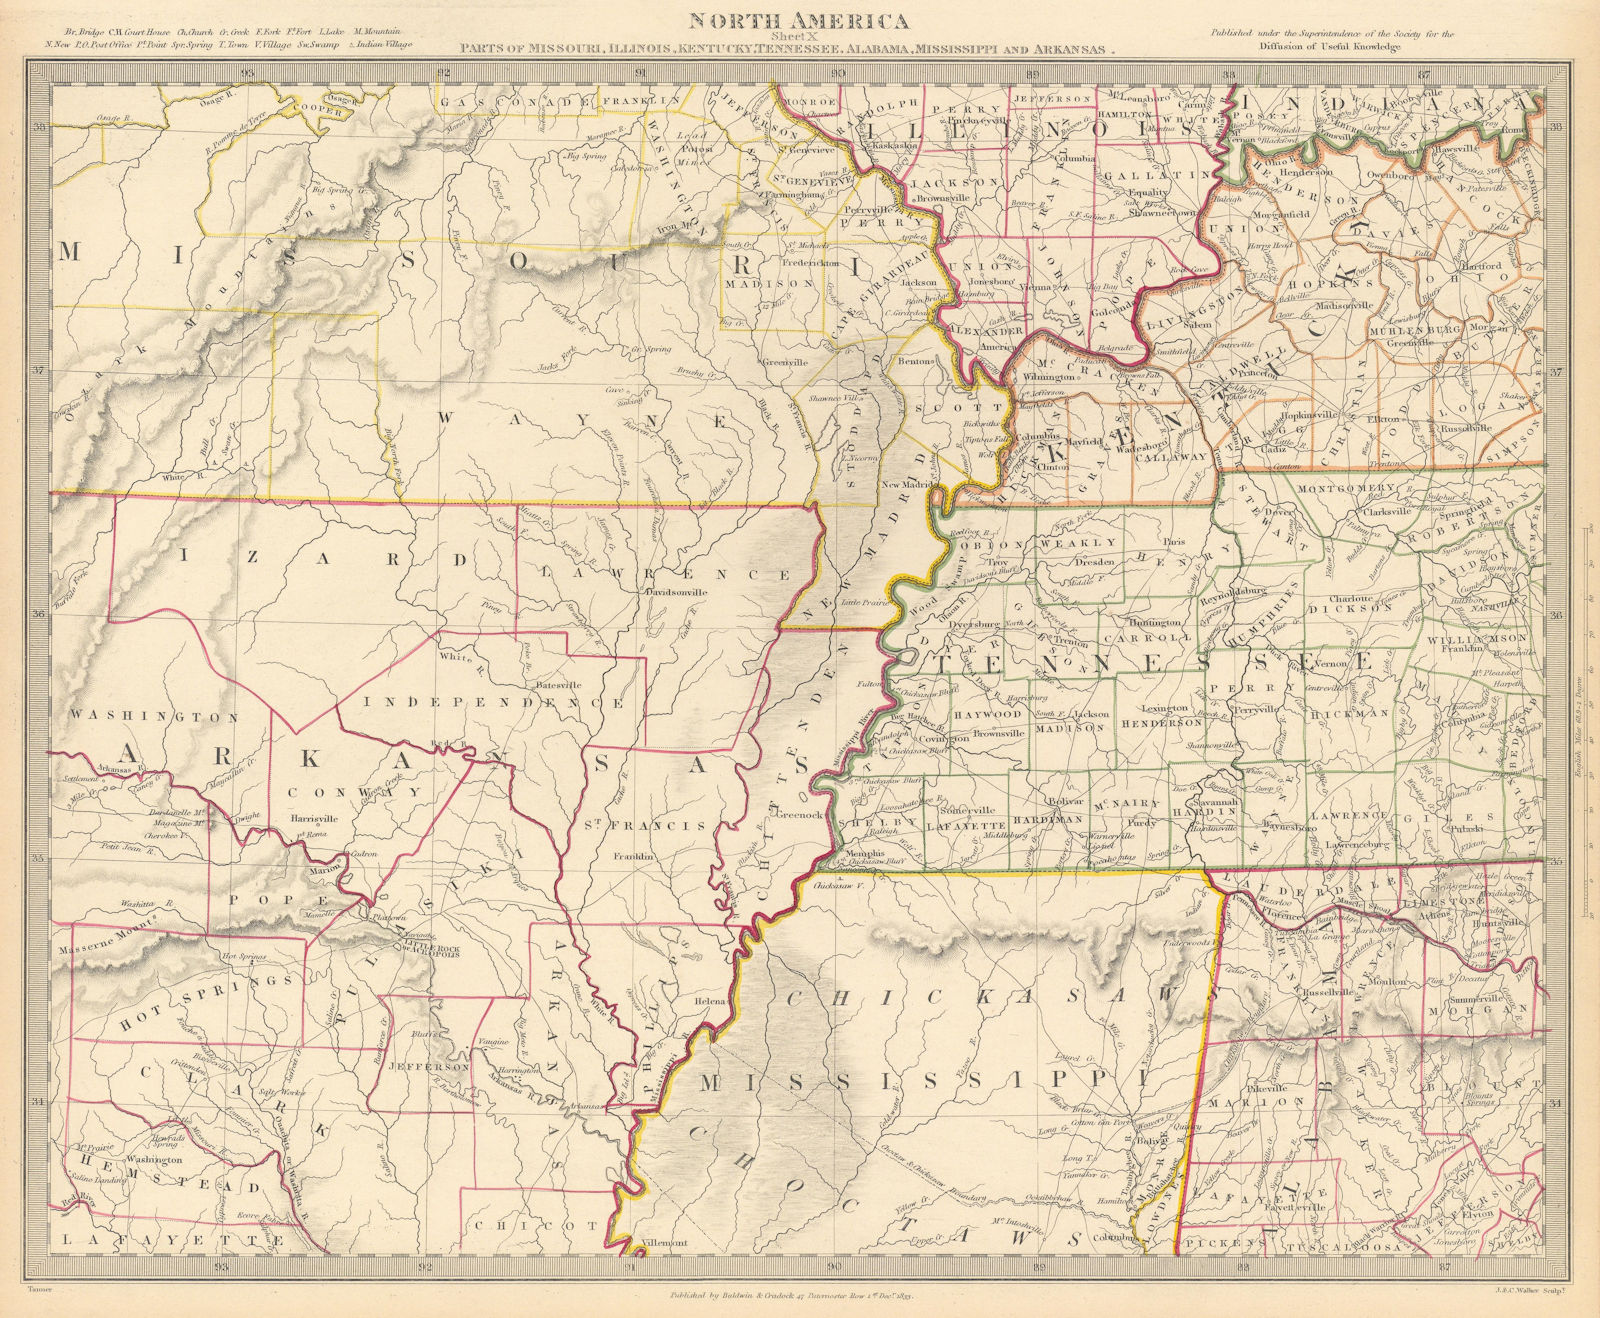 Associate Product USA. AR MO TN MS IL IN KY AL. Choctaw Chickasaw boundaries. SDUK 1844 old map